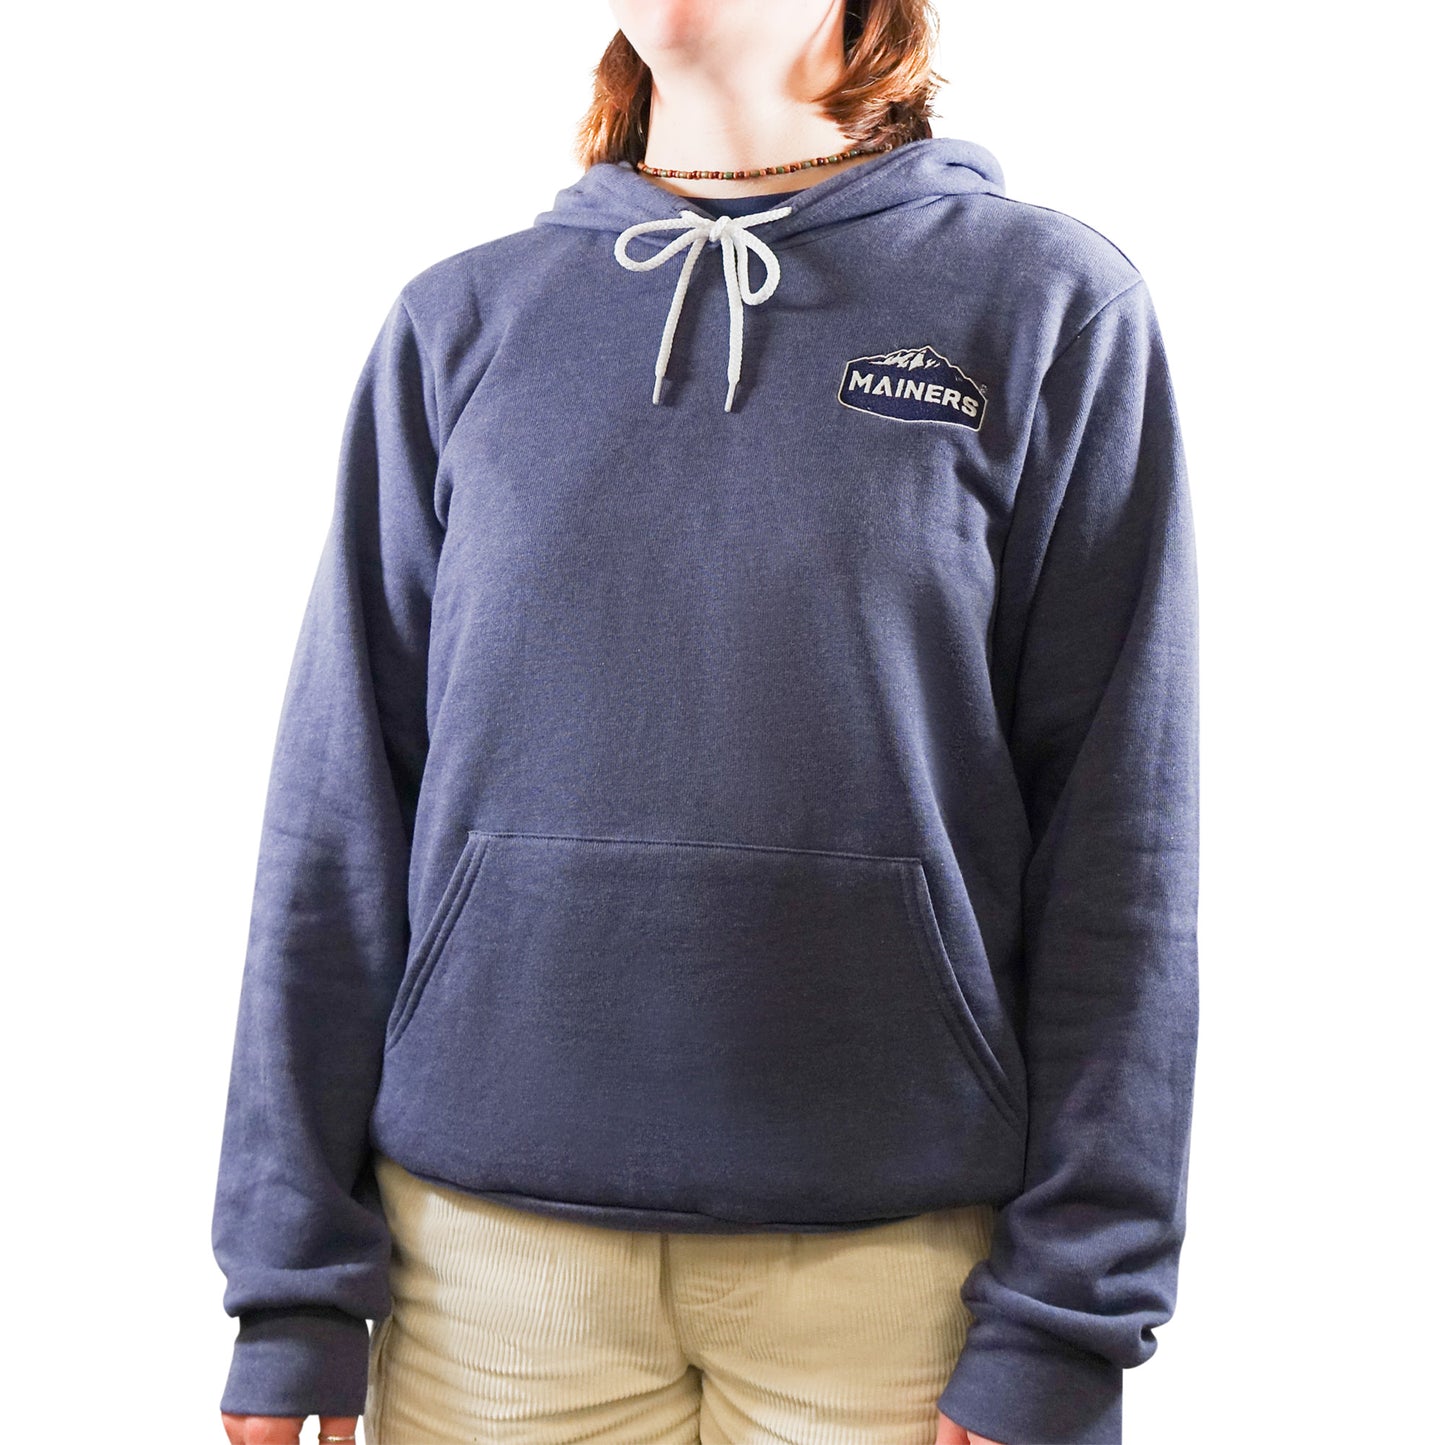 A woman wearing a Mainers pullover hoodie in soft blue.